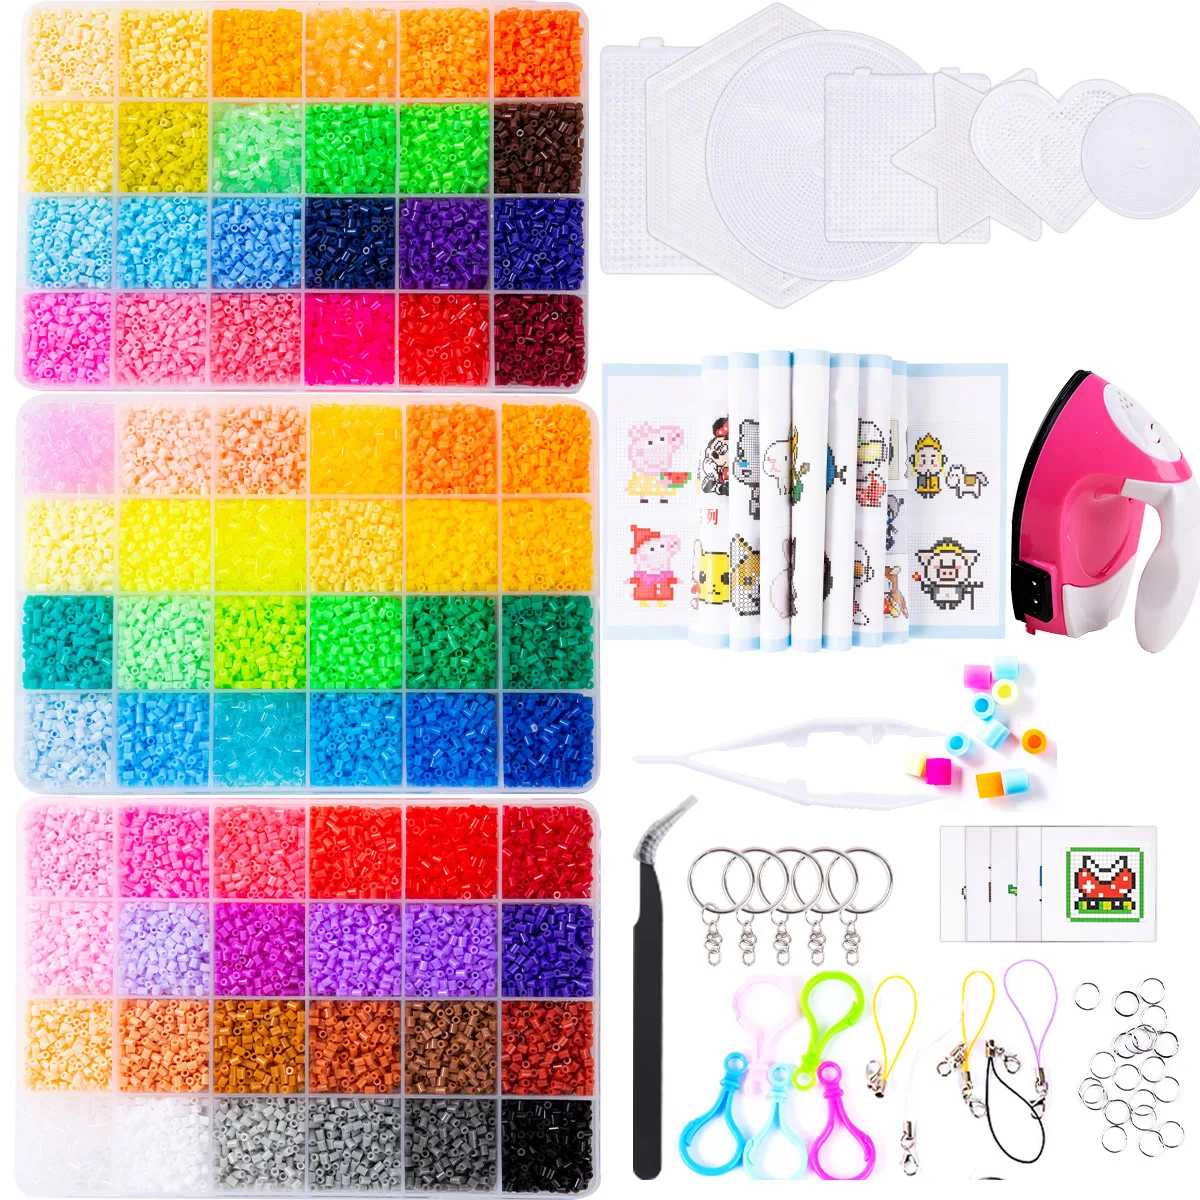 

Fuse Beads Kit - 39000pcs 2.6mm Hama Beads Puzzle Toys 72 Colors DIY Perler Beads for Children Adults 3D Puzzles Fuse Beads Hama